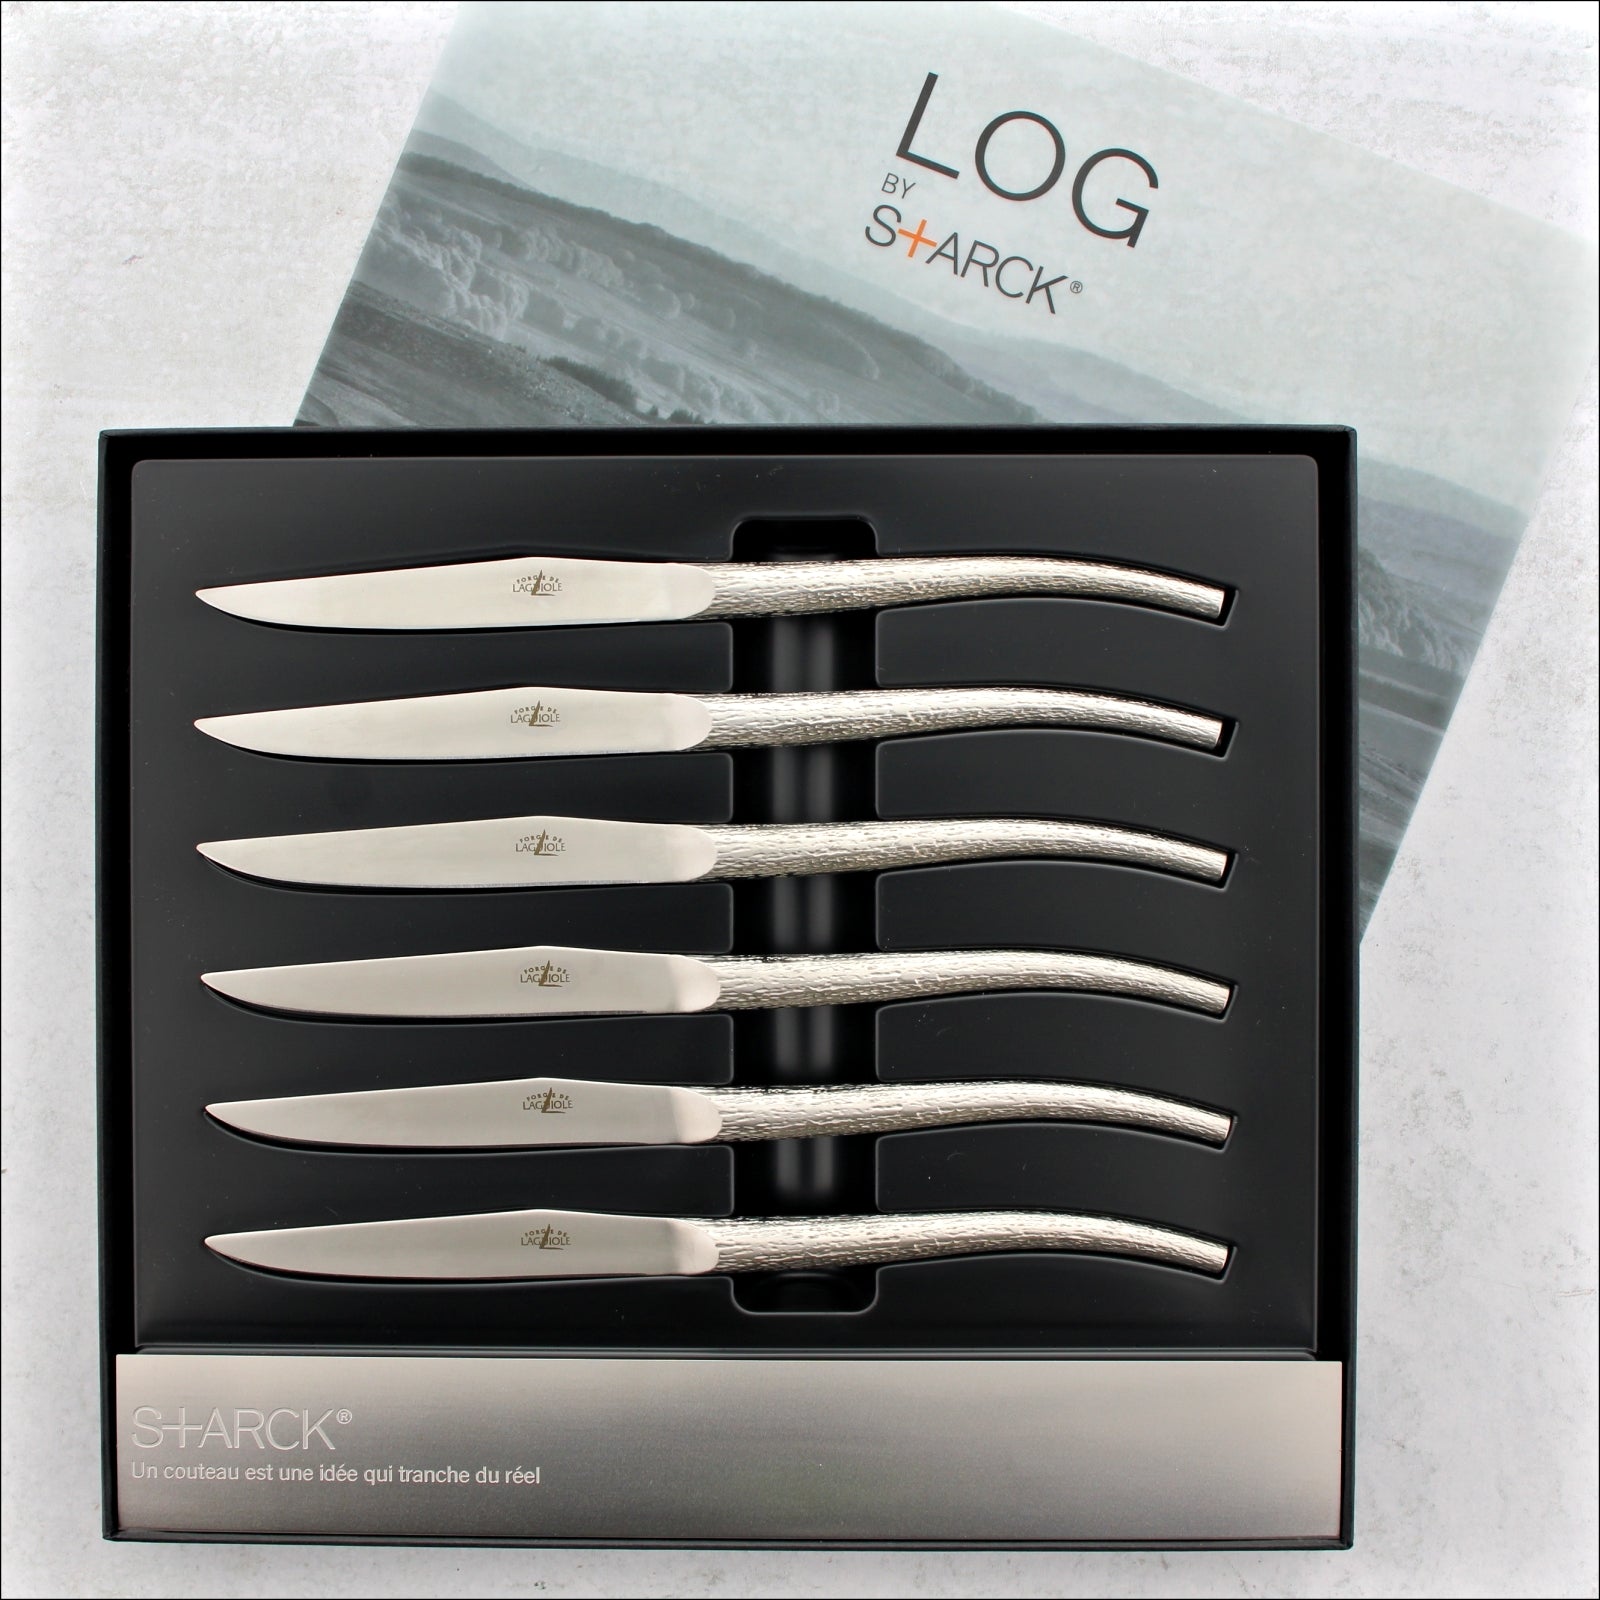 Table knives design Philippe Starck in stainless